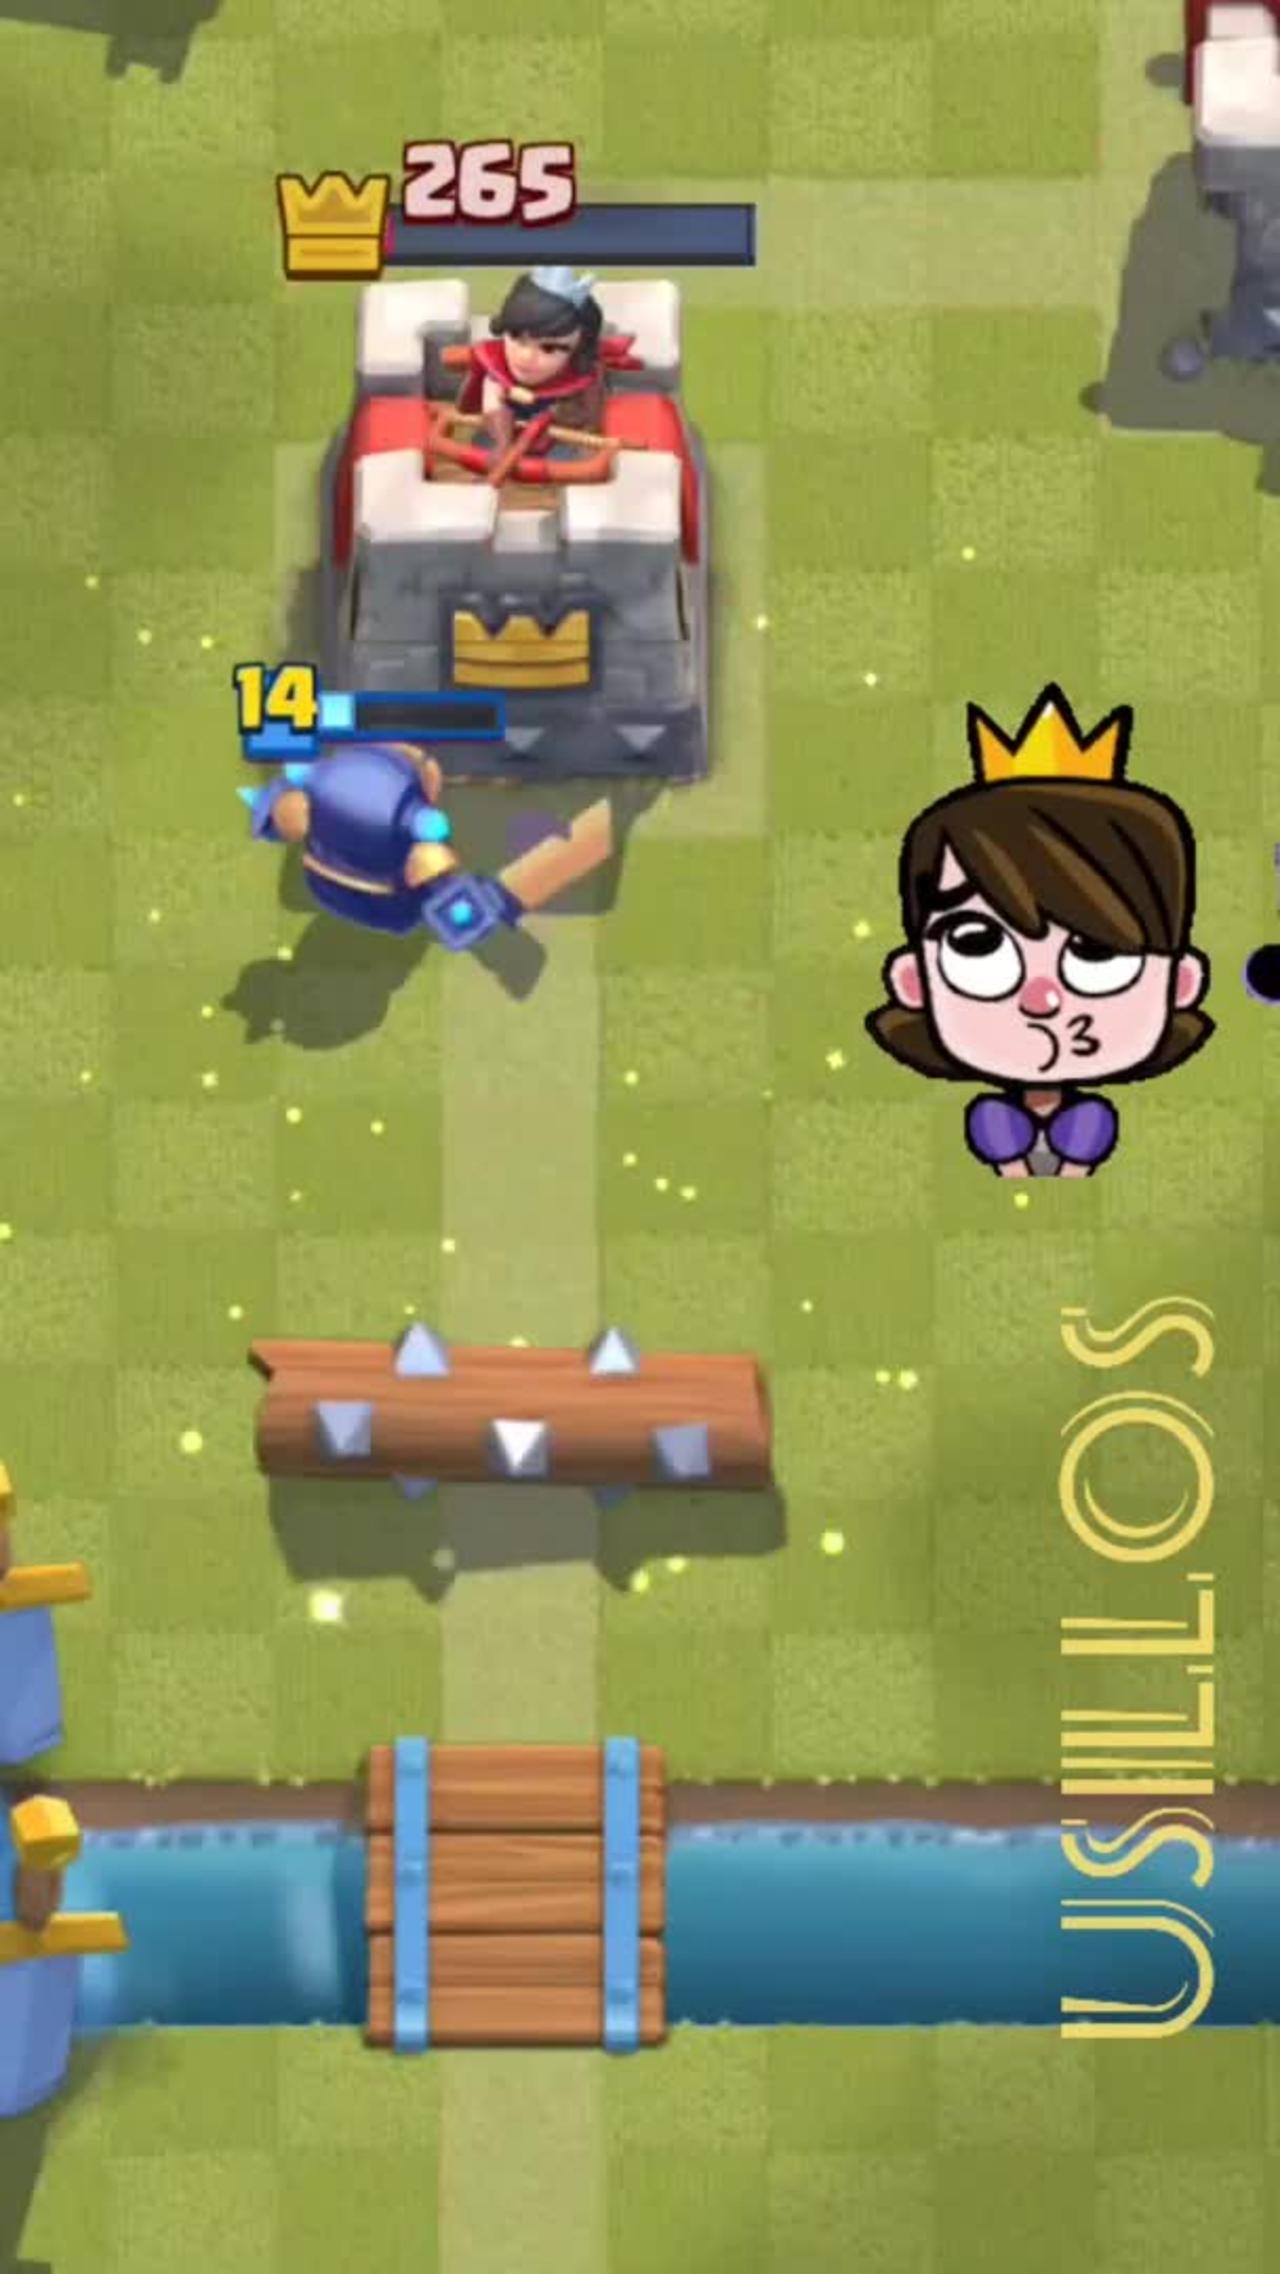 ✔THE PRINCESS 👸 MAKES A STELLAR CAMEO IN THE GAME 😂😂😂 Clash Royale 2022 by Usillos